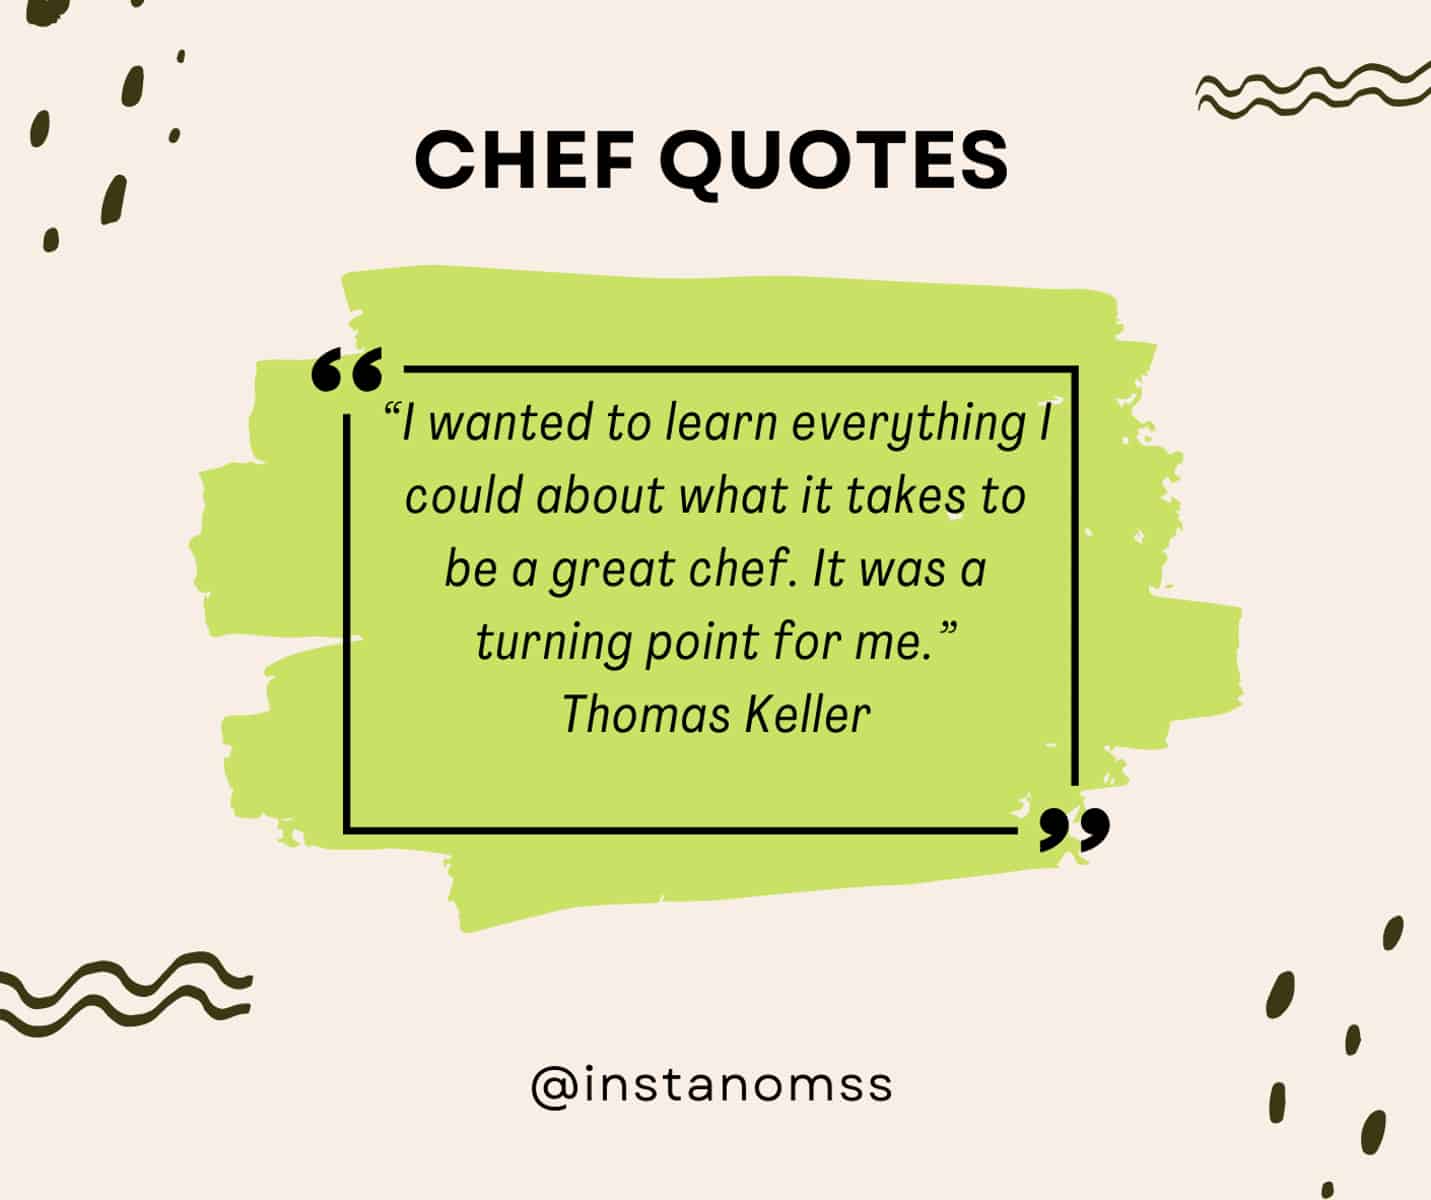 “I wanted to learn everything I could about what it takes to be a great chef. It was a turning point for me.” Thomas Keller